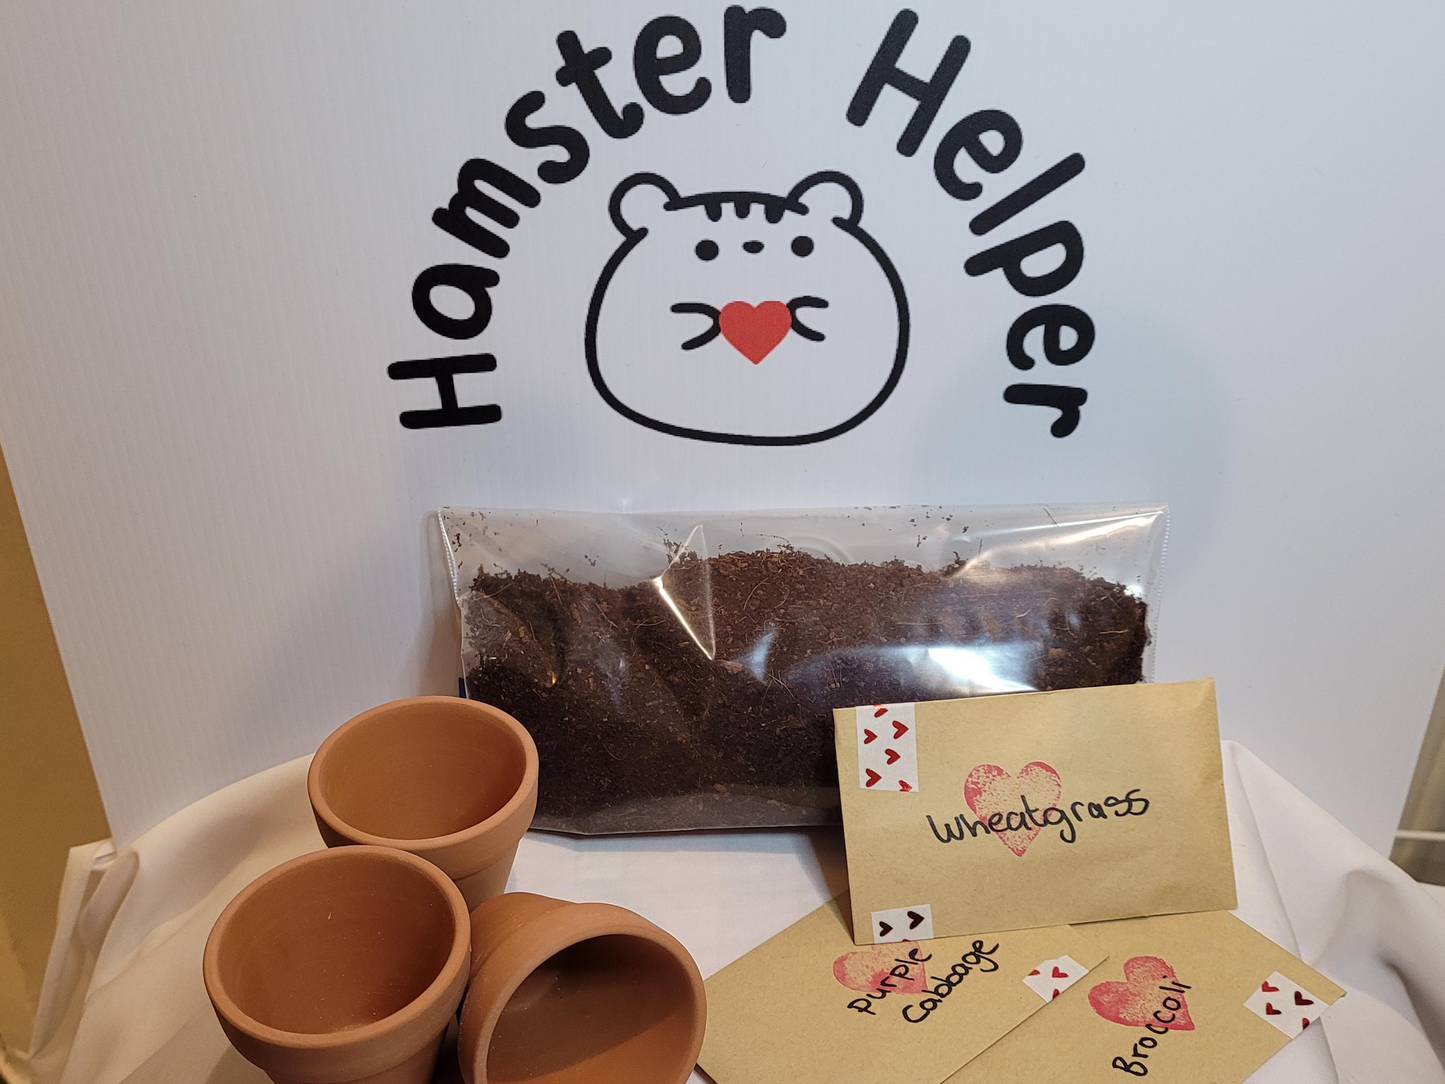 A kit for growing microgreens containing three terracotta pots, three packets of seeds and a bag of hamster safe soil arranged in front of the Hamster Helper logo